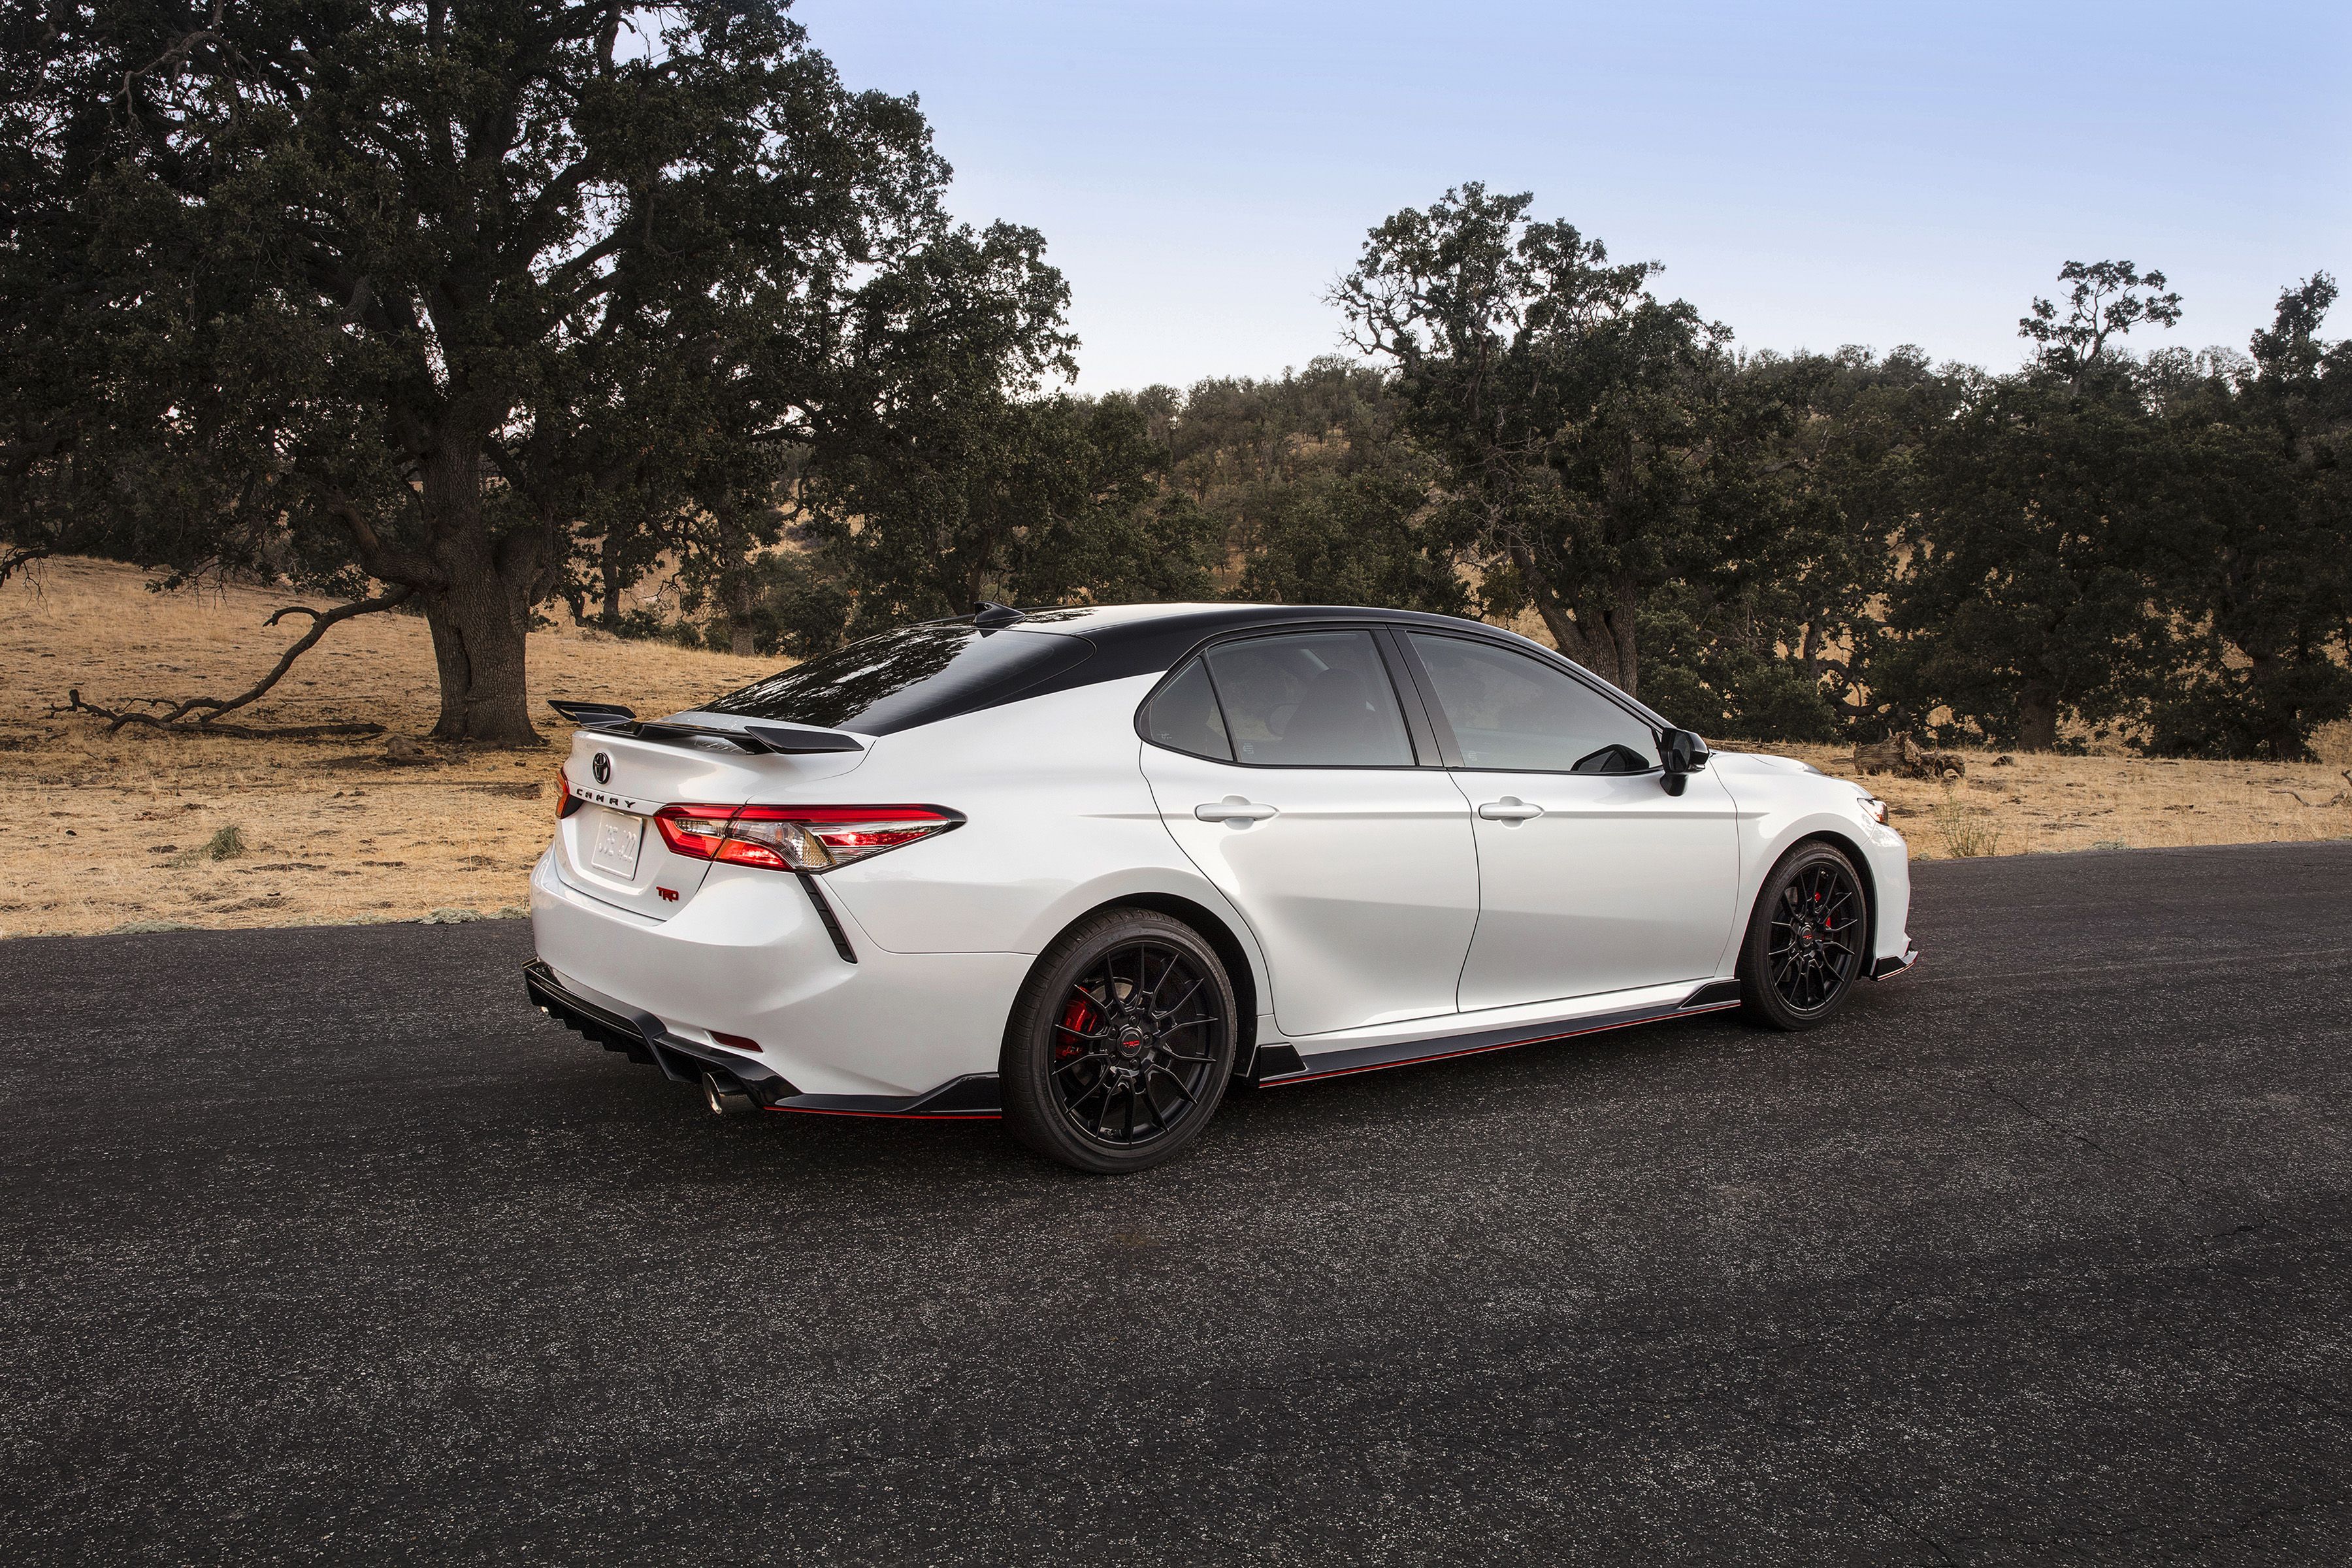 2020 Toyota Camry Trd Is The Sportiest Version Of The Mid Size Sedan